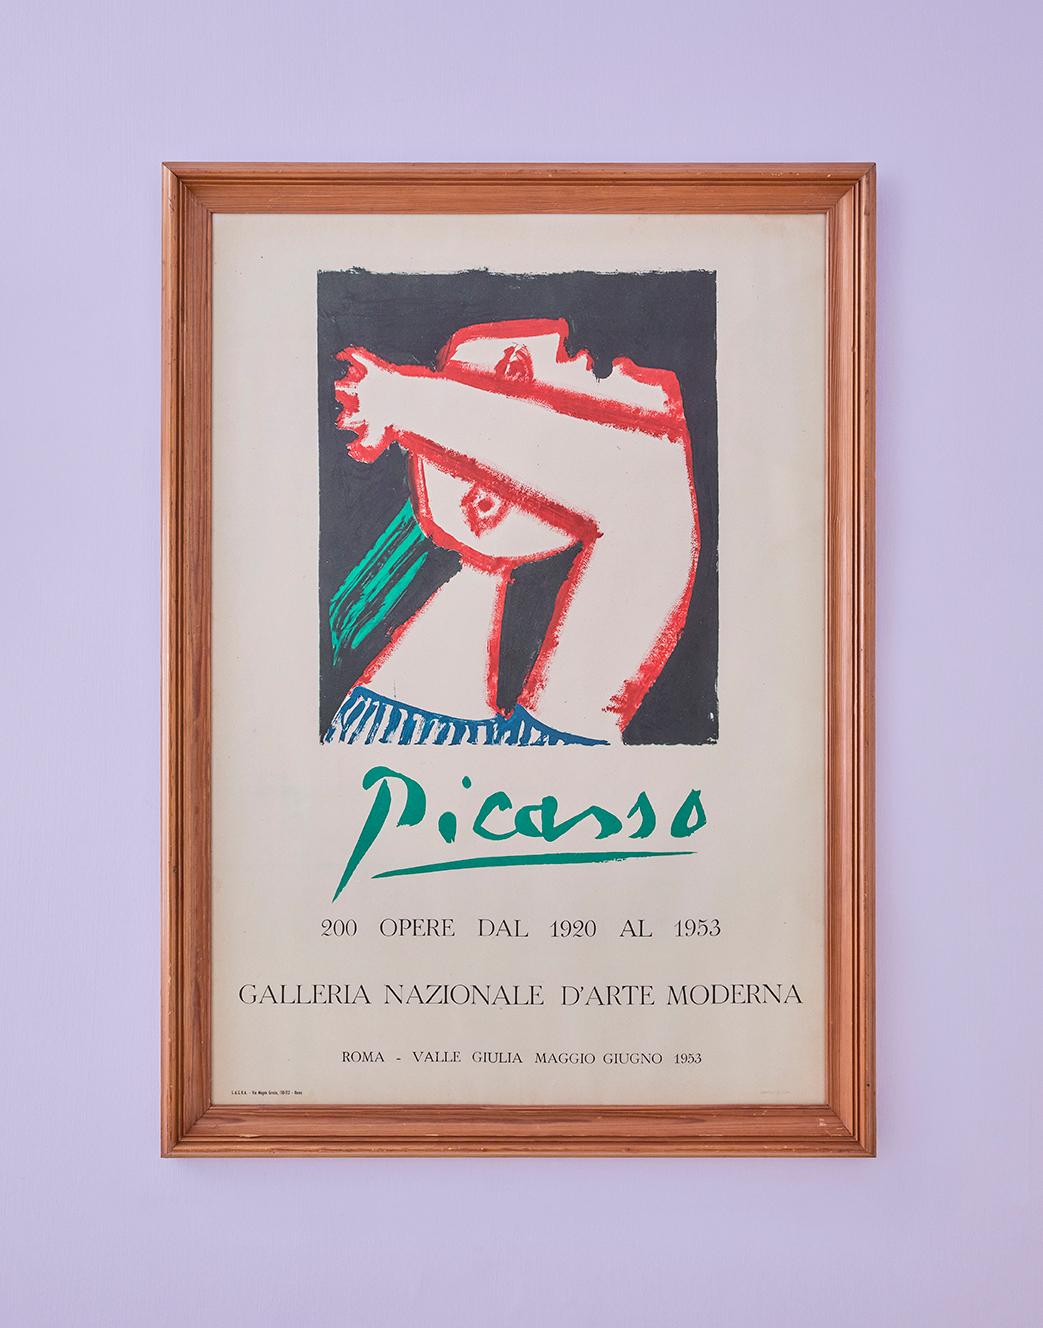 Pablo Picasso,
Italy, 1953

Vintage exhibition poster in frame from Galleria Nazionale D'Arte Moderna. 

Measures: H 110.5 x W 80 cm.